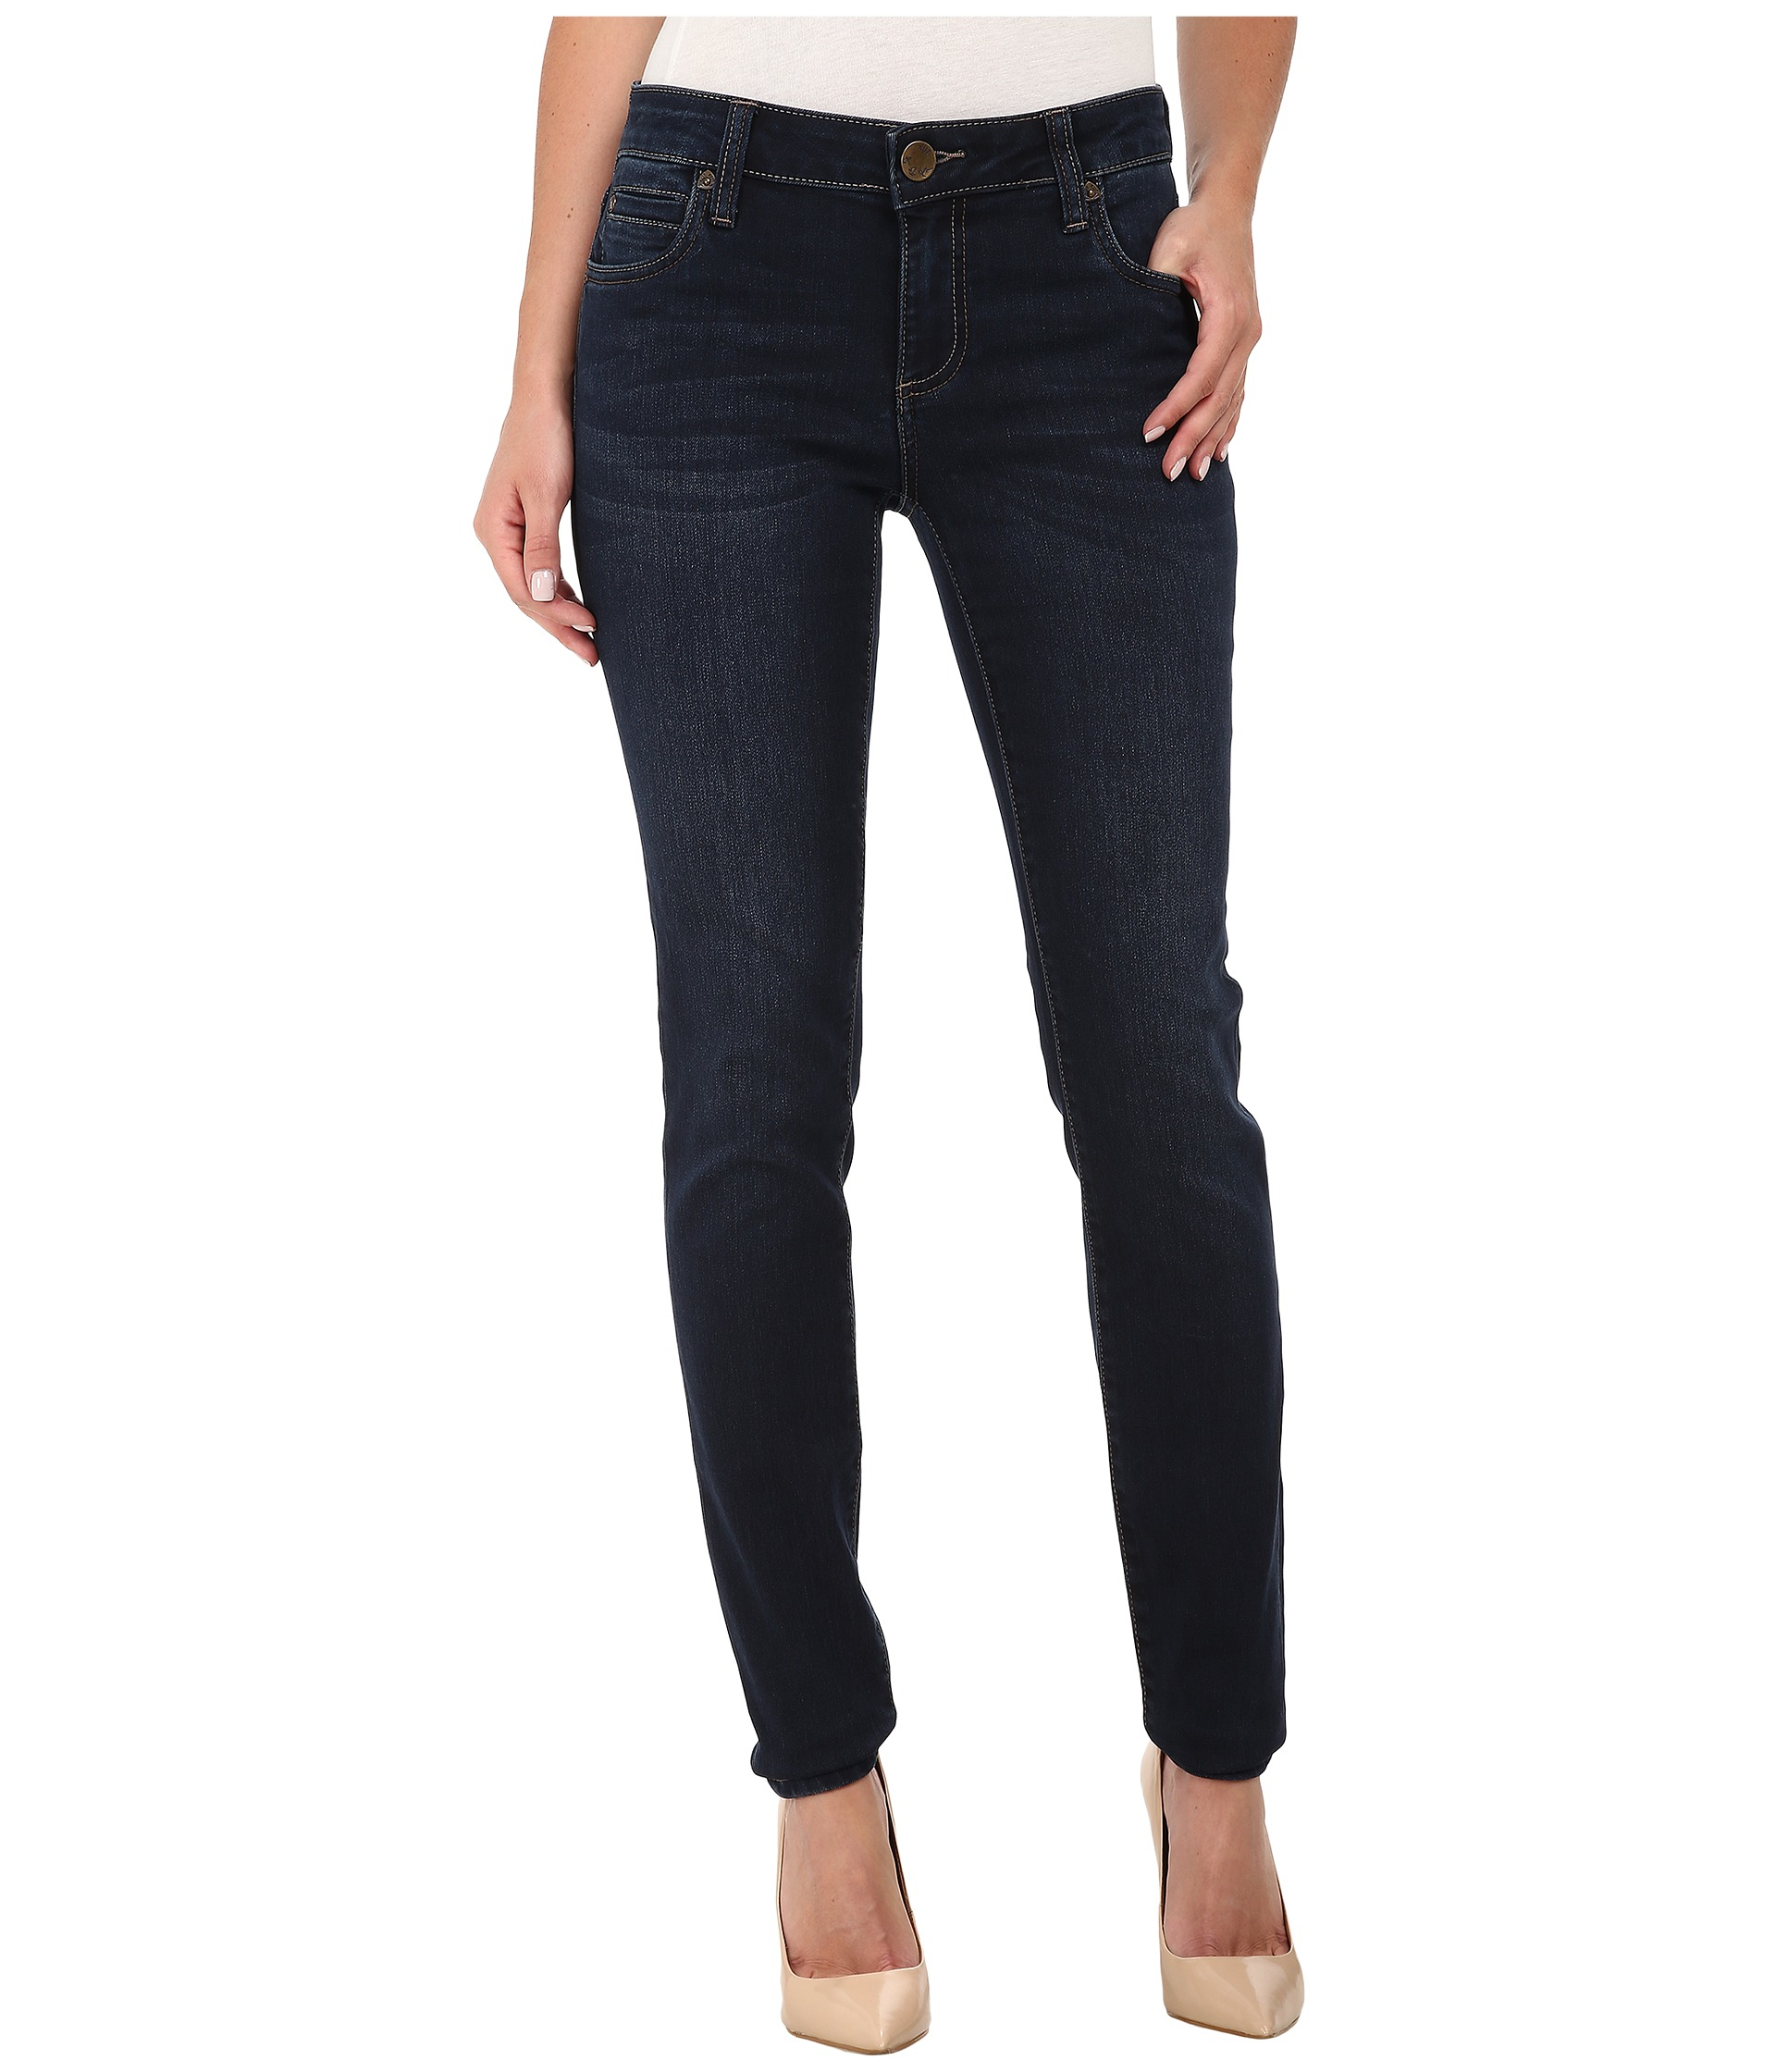 Kut from the kloth Mia Toothpick Skinny Jeans In Approve in Black | Lyst